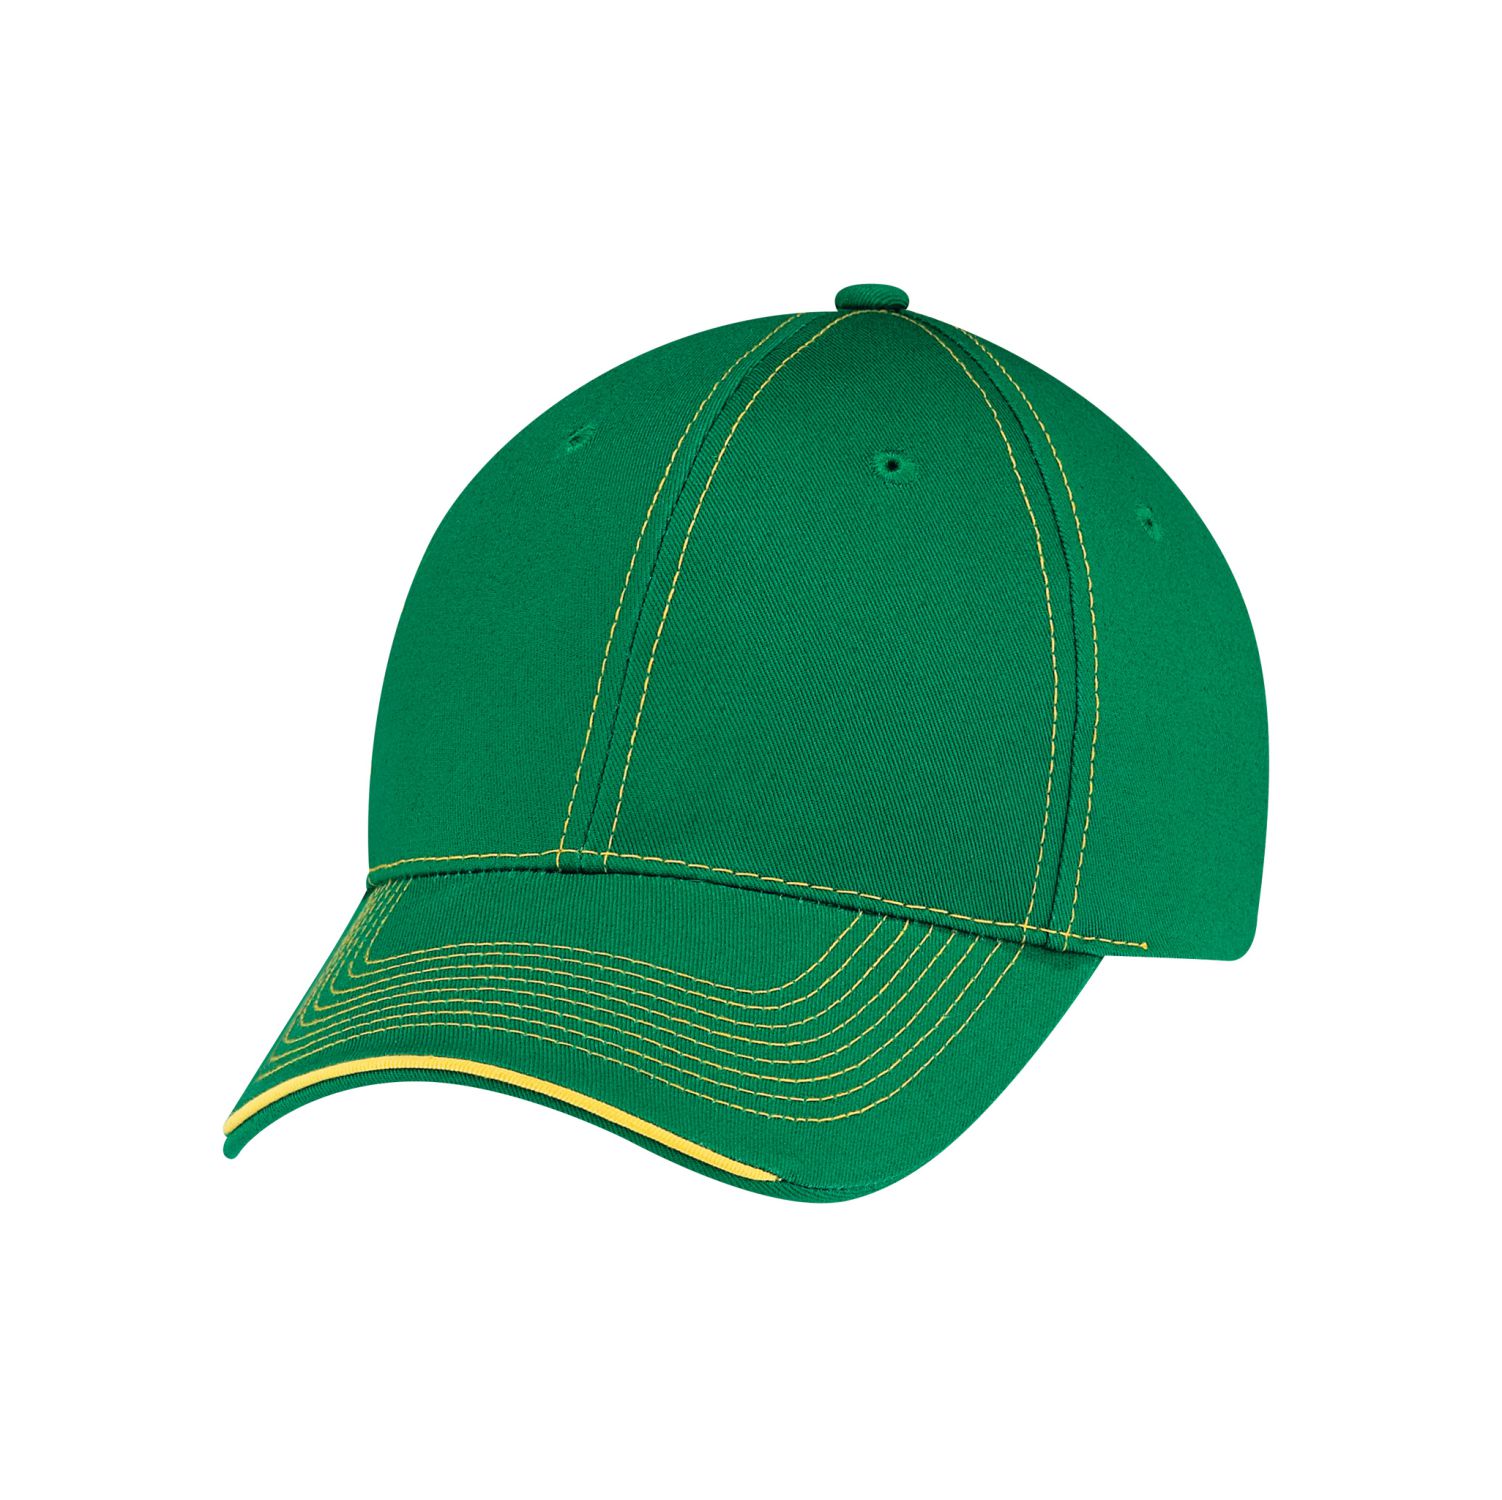 AJM 6-Panel Constructed Full-Fit Hat #6F617M Kelly Green / Maize